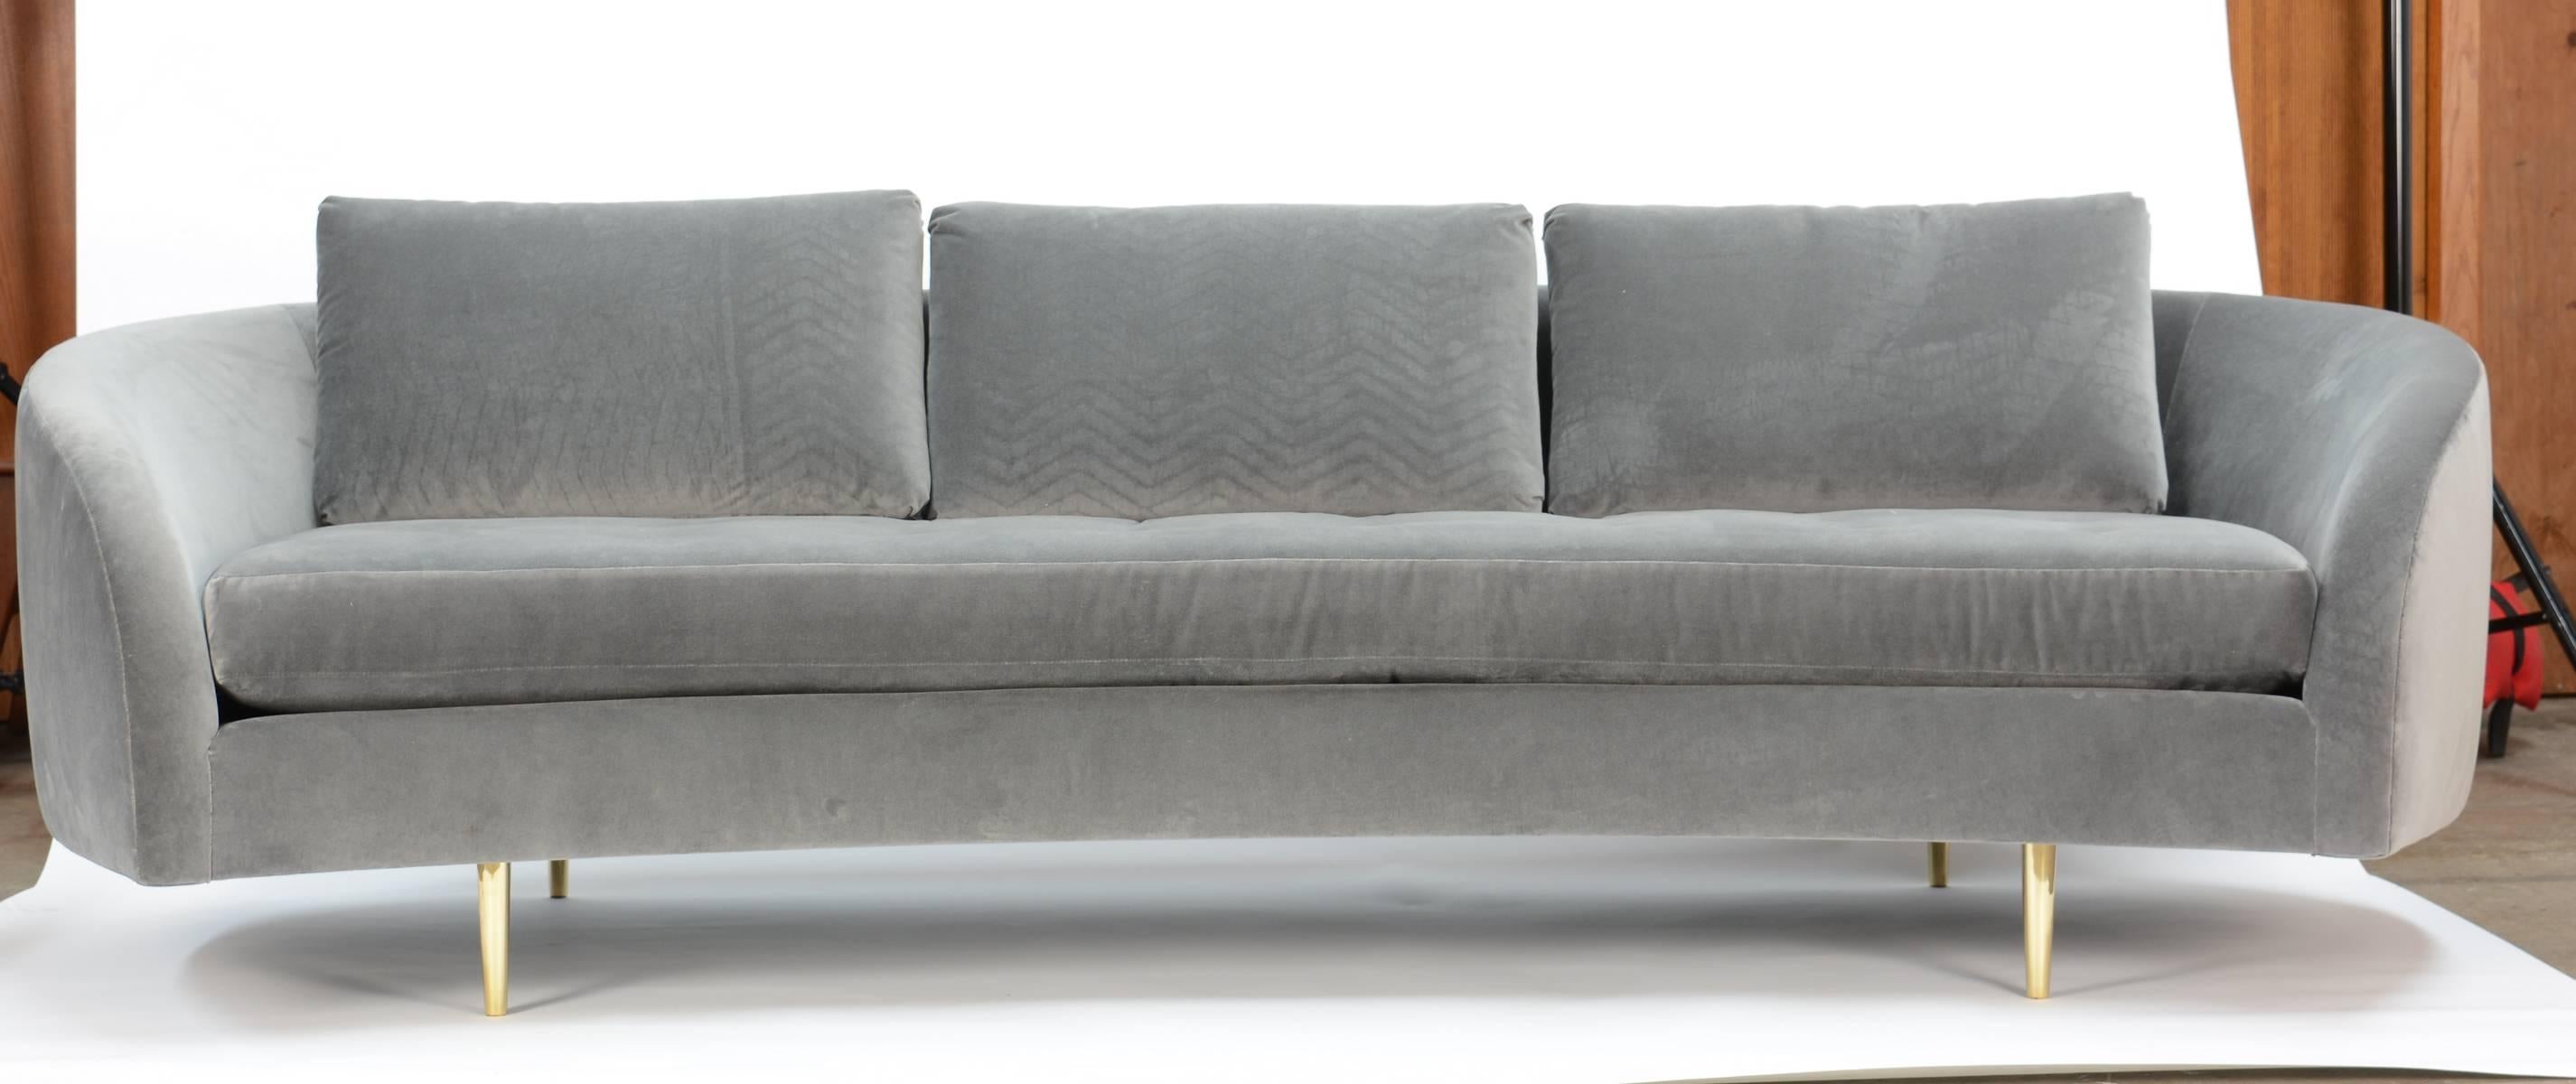 "Cloud's Rest" says it all!  A beautiful 20th Century Interiors original reproduction sofa from a classic Mid-Century design, floating on aluminum or brass legs.
Choose our velour fabric original or have it produced in the fabric of your